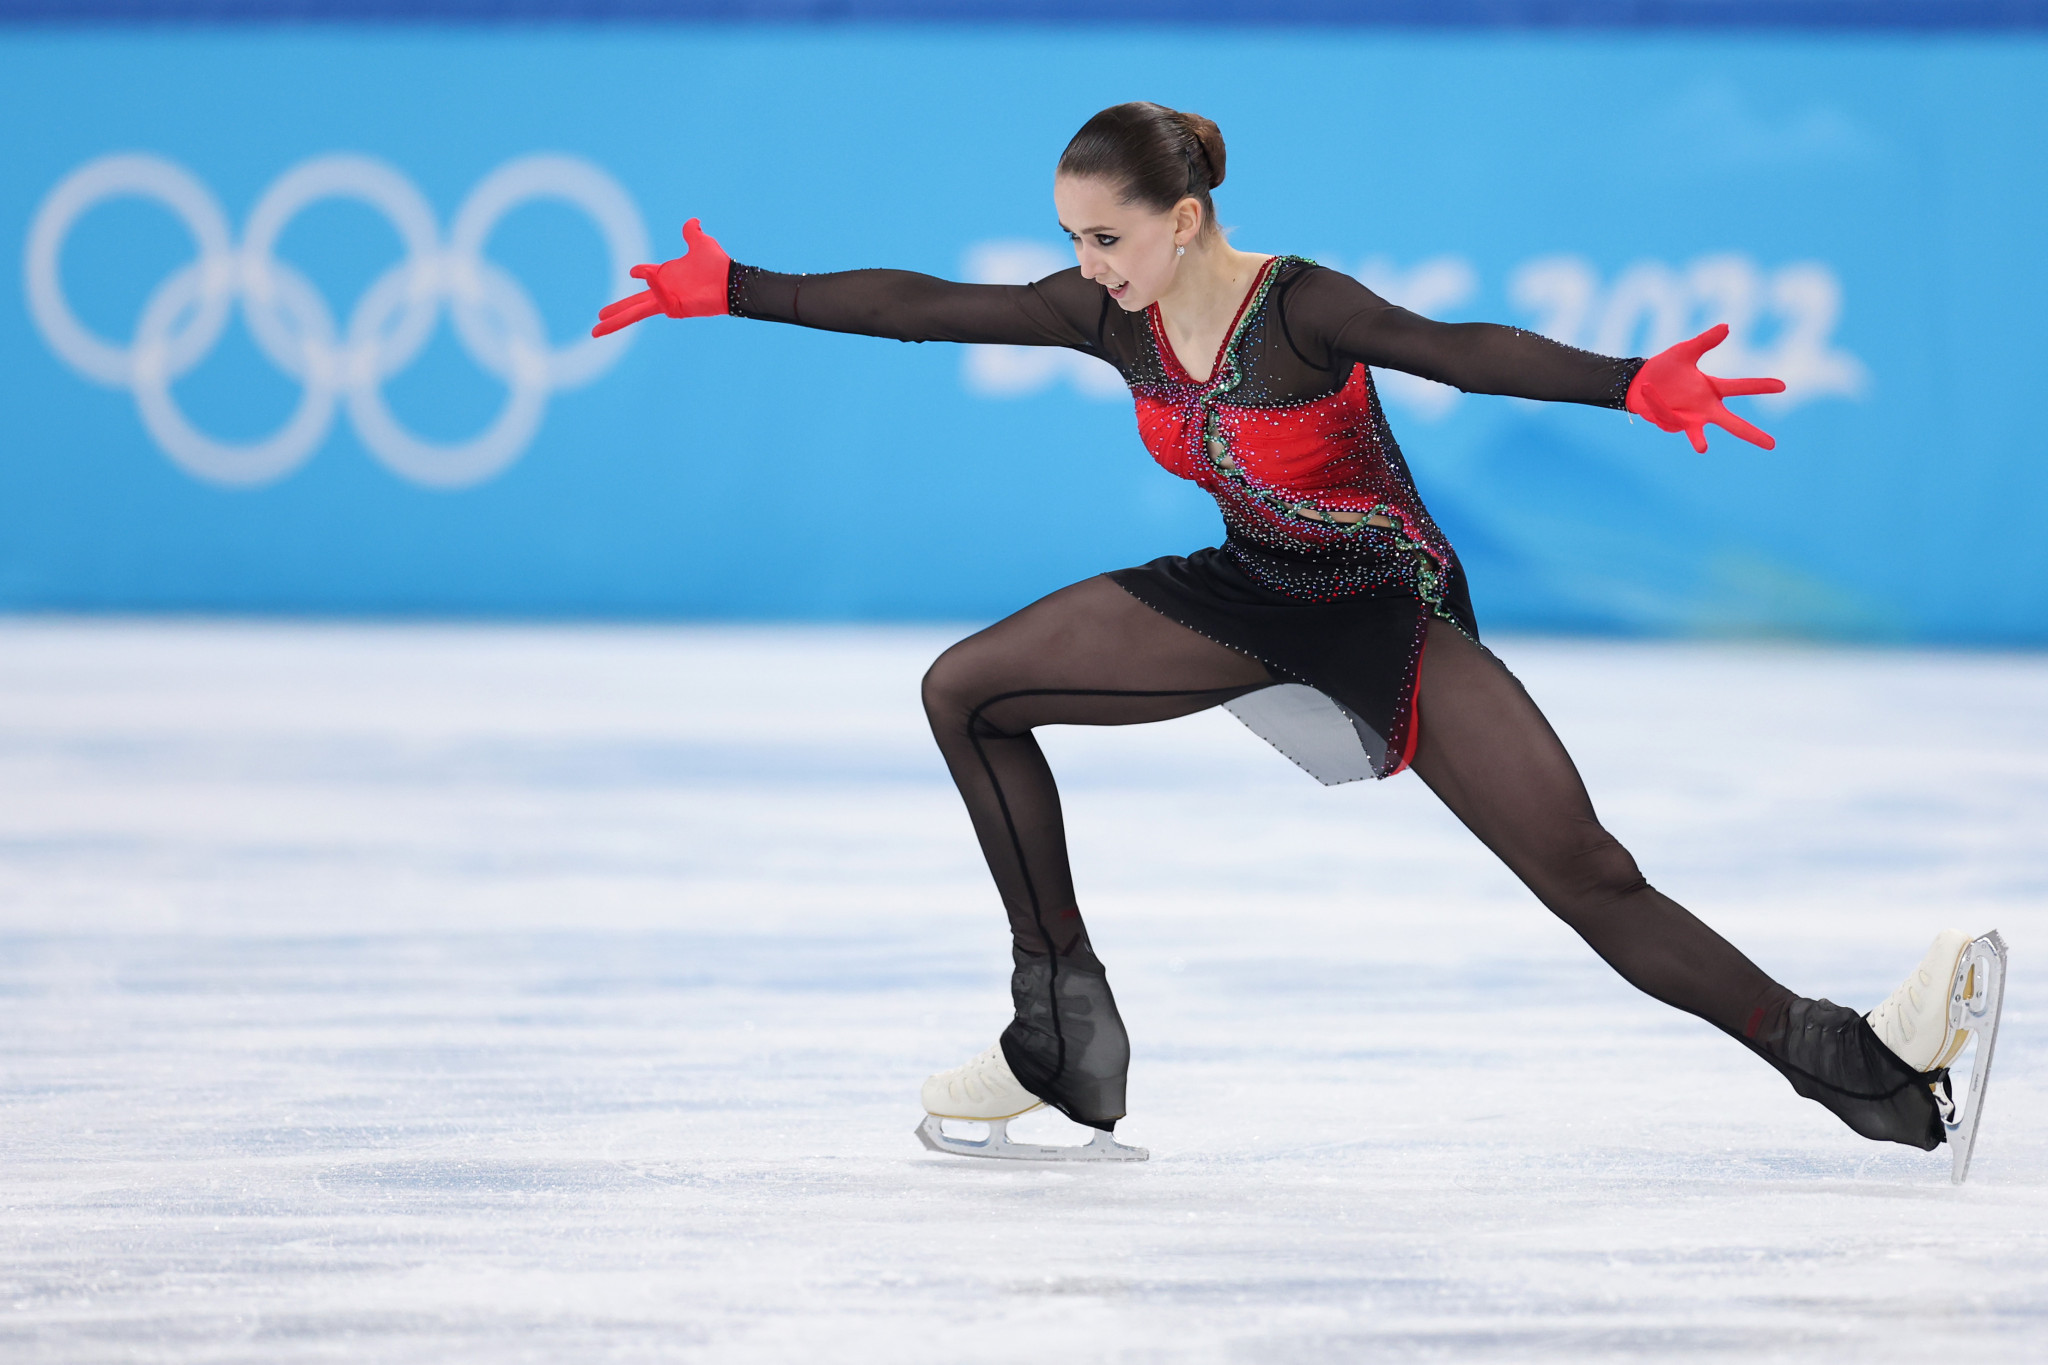 The doping controversy involving the Russian Olympic Committee's Kamila Valieva sparked renewed calls for an increased age limit in figure skating ©Getty Images